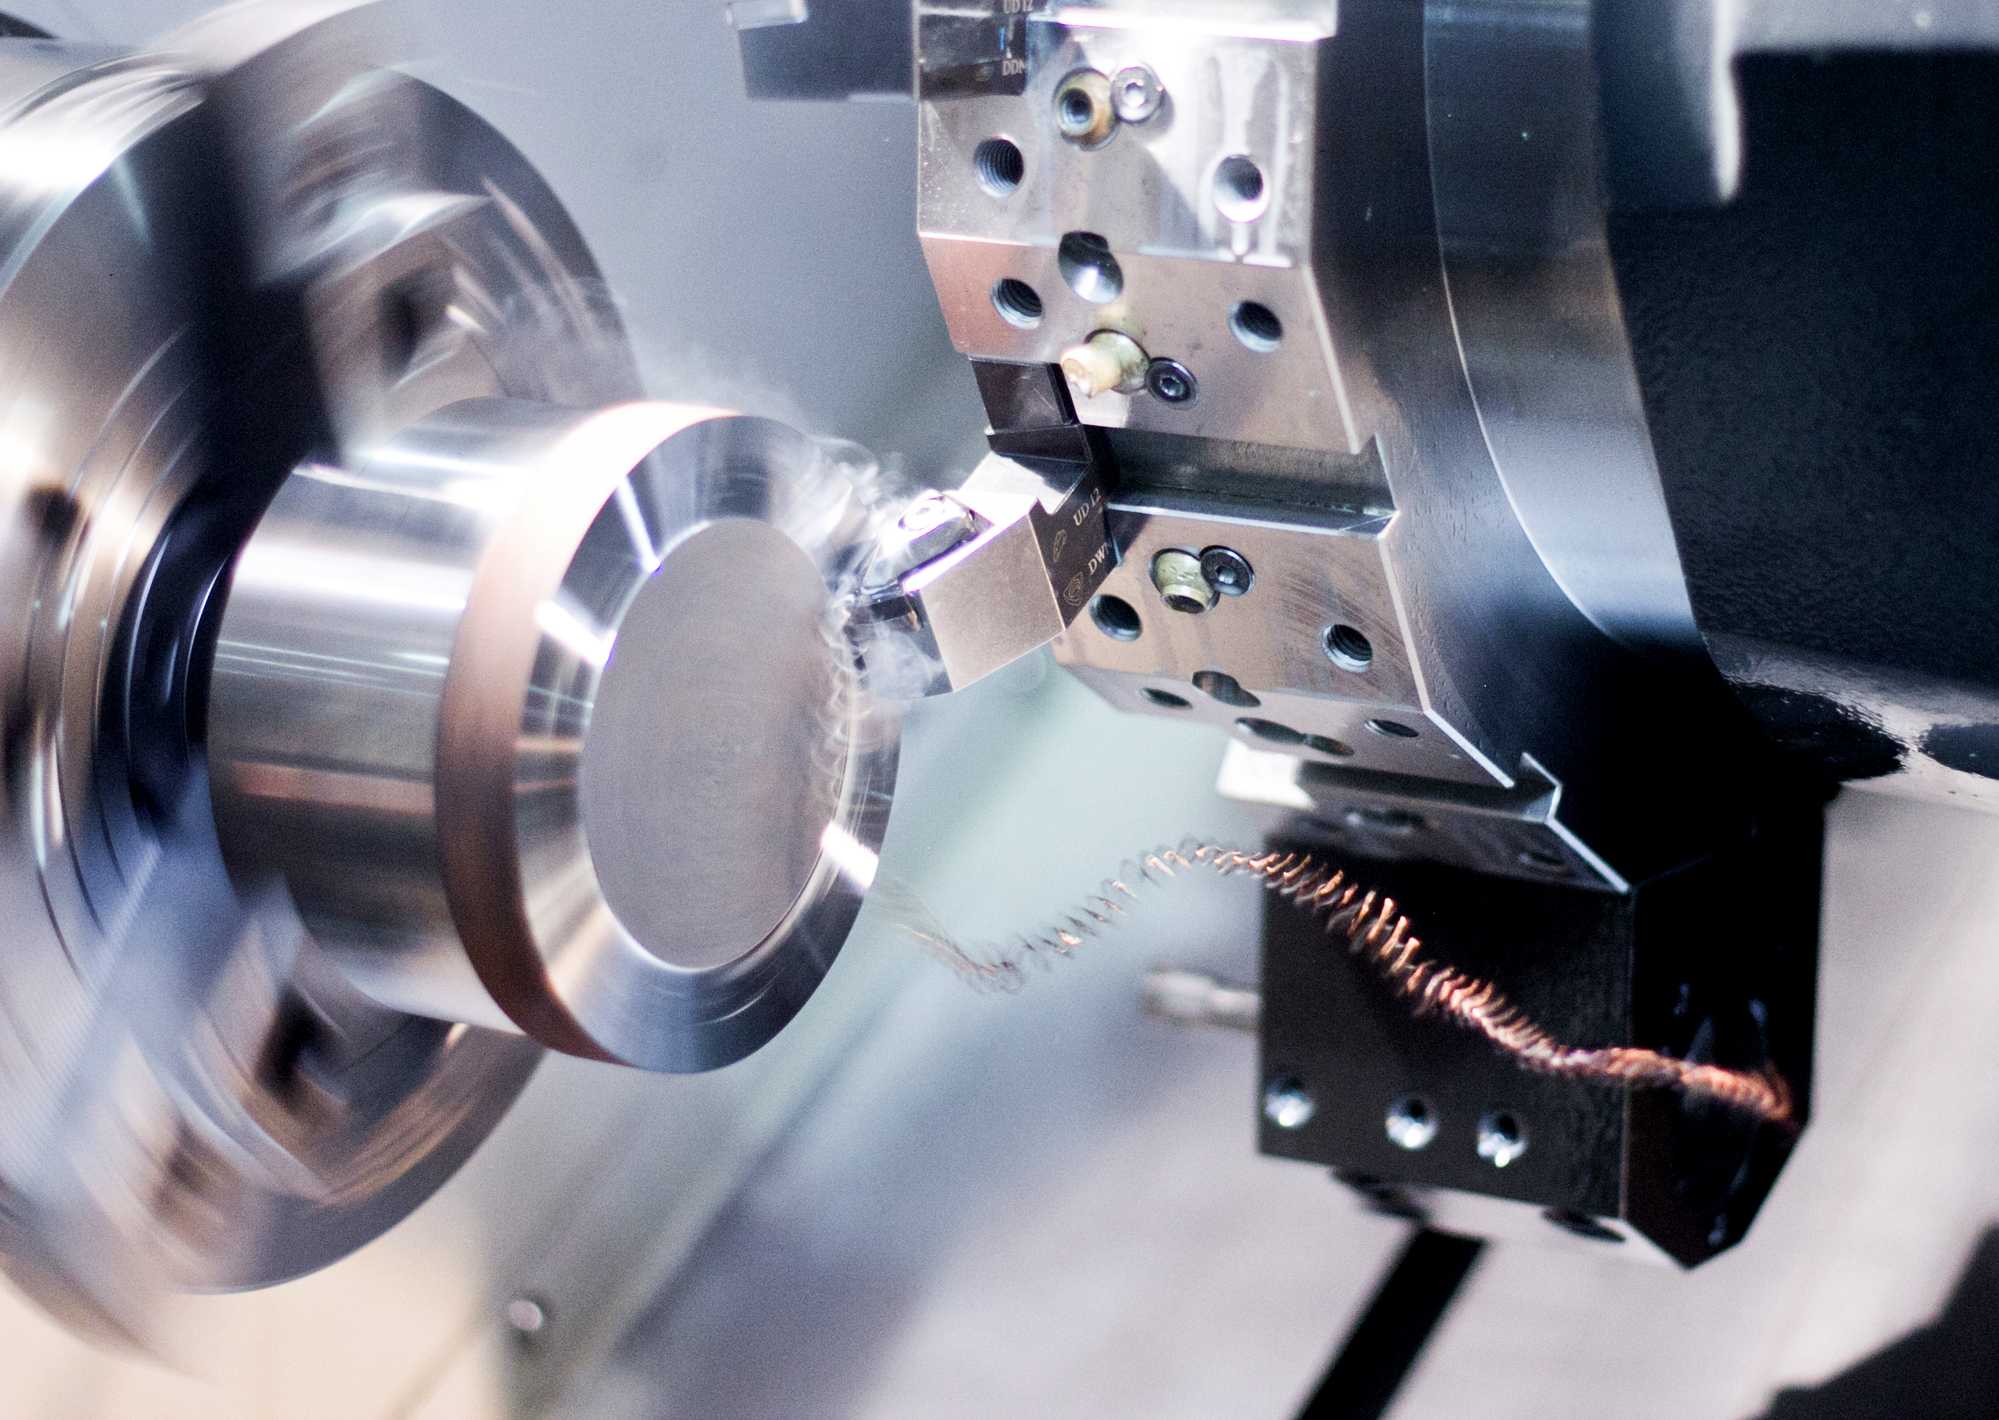 professional cnc machining services at vietnam metal manufacturing company